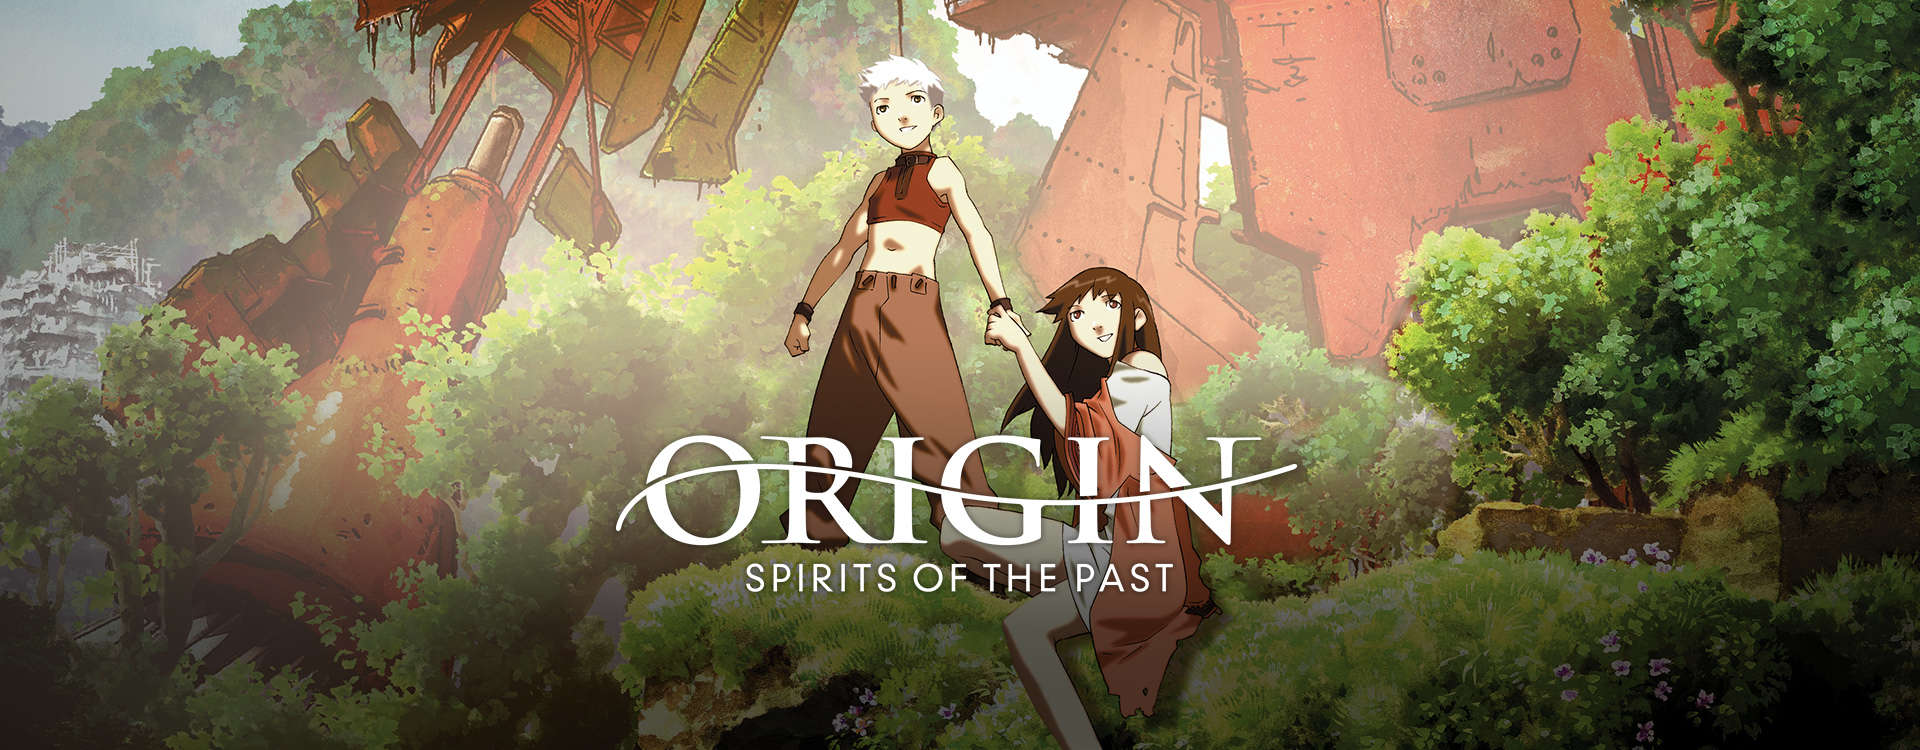 Origin Spirits of the Past Archives  Anime Trending  Your Voice in Anime